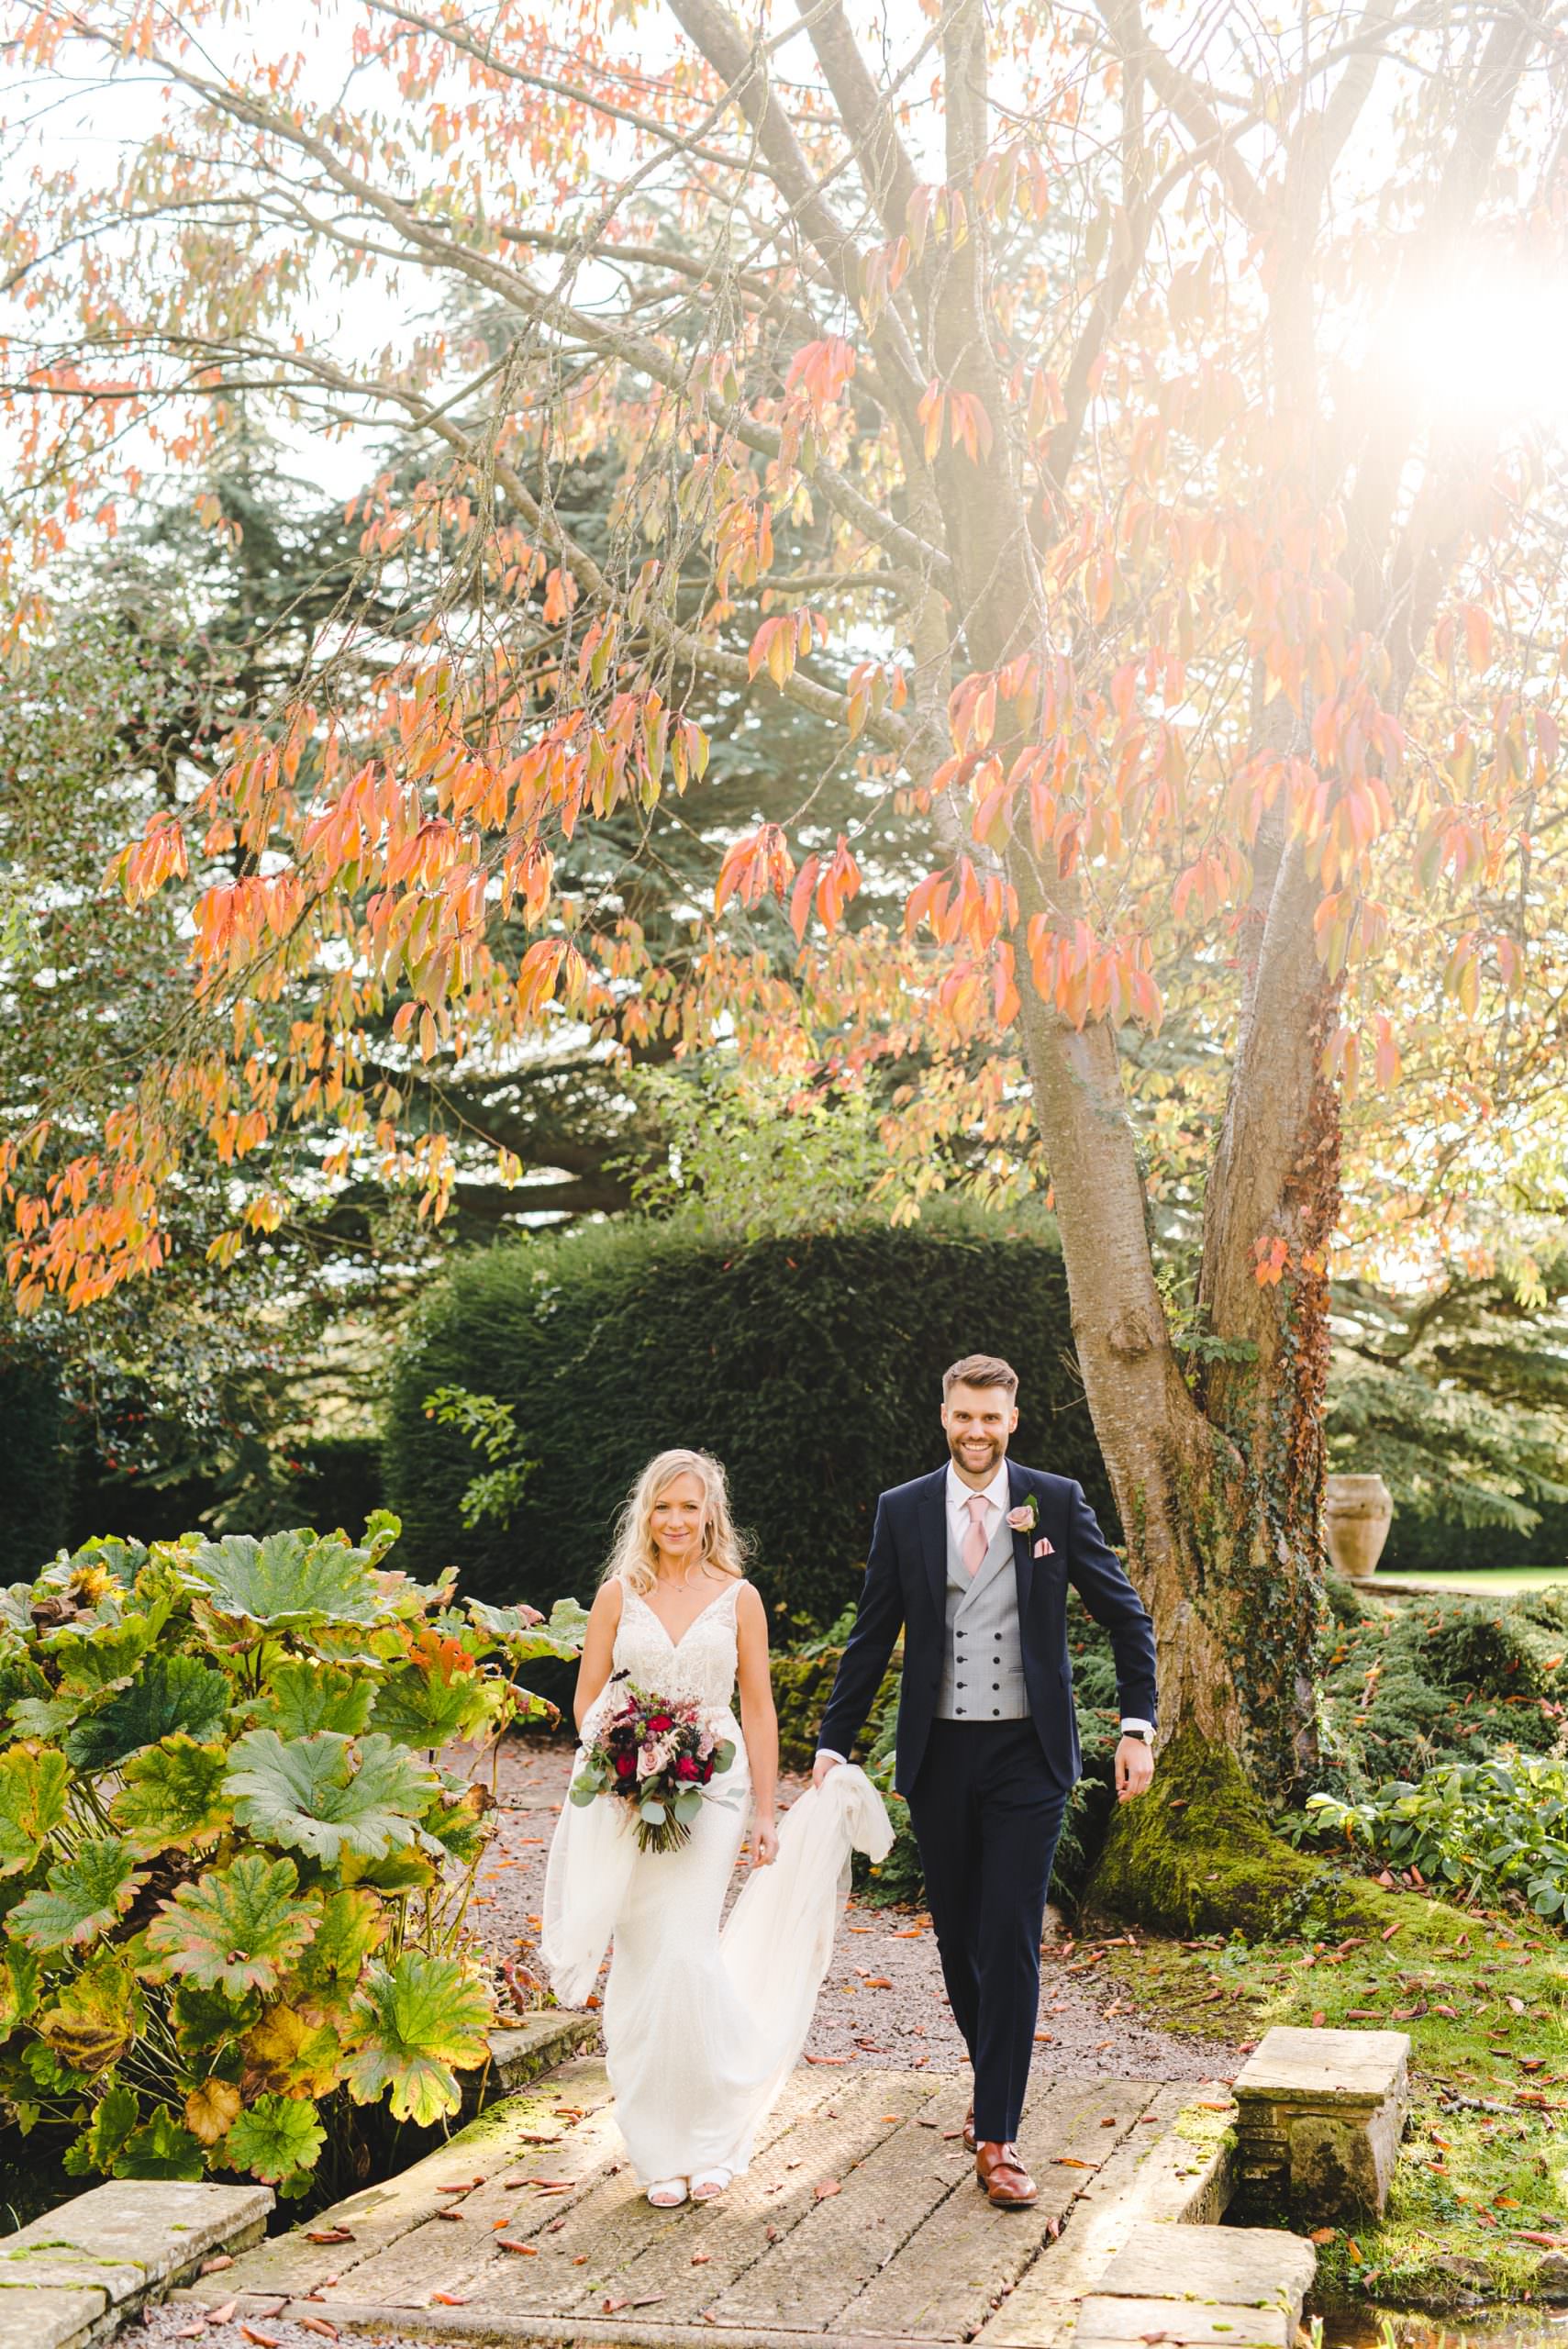 A bride and groom walking in the grounds at Brinsop Court